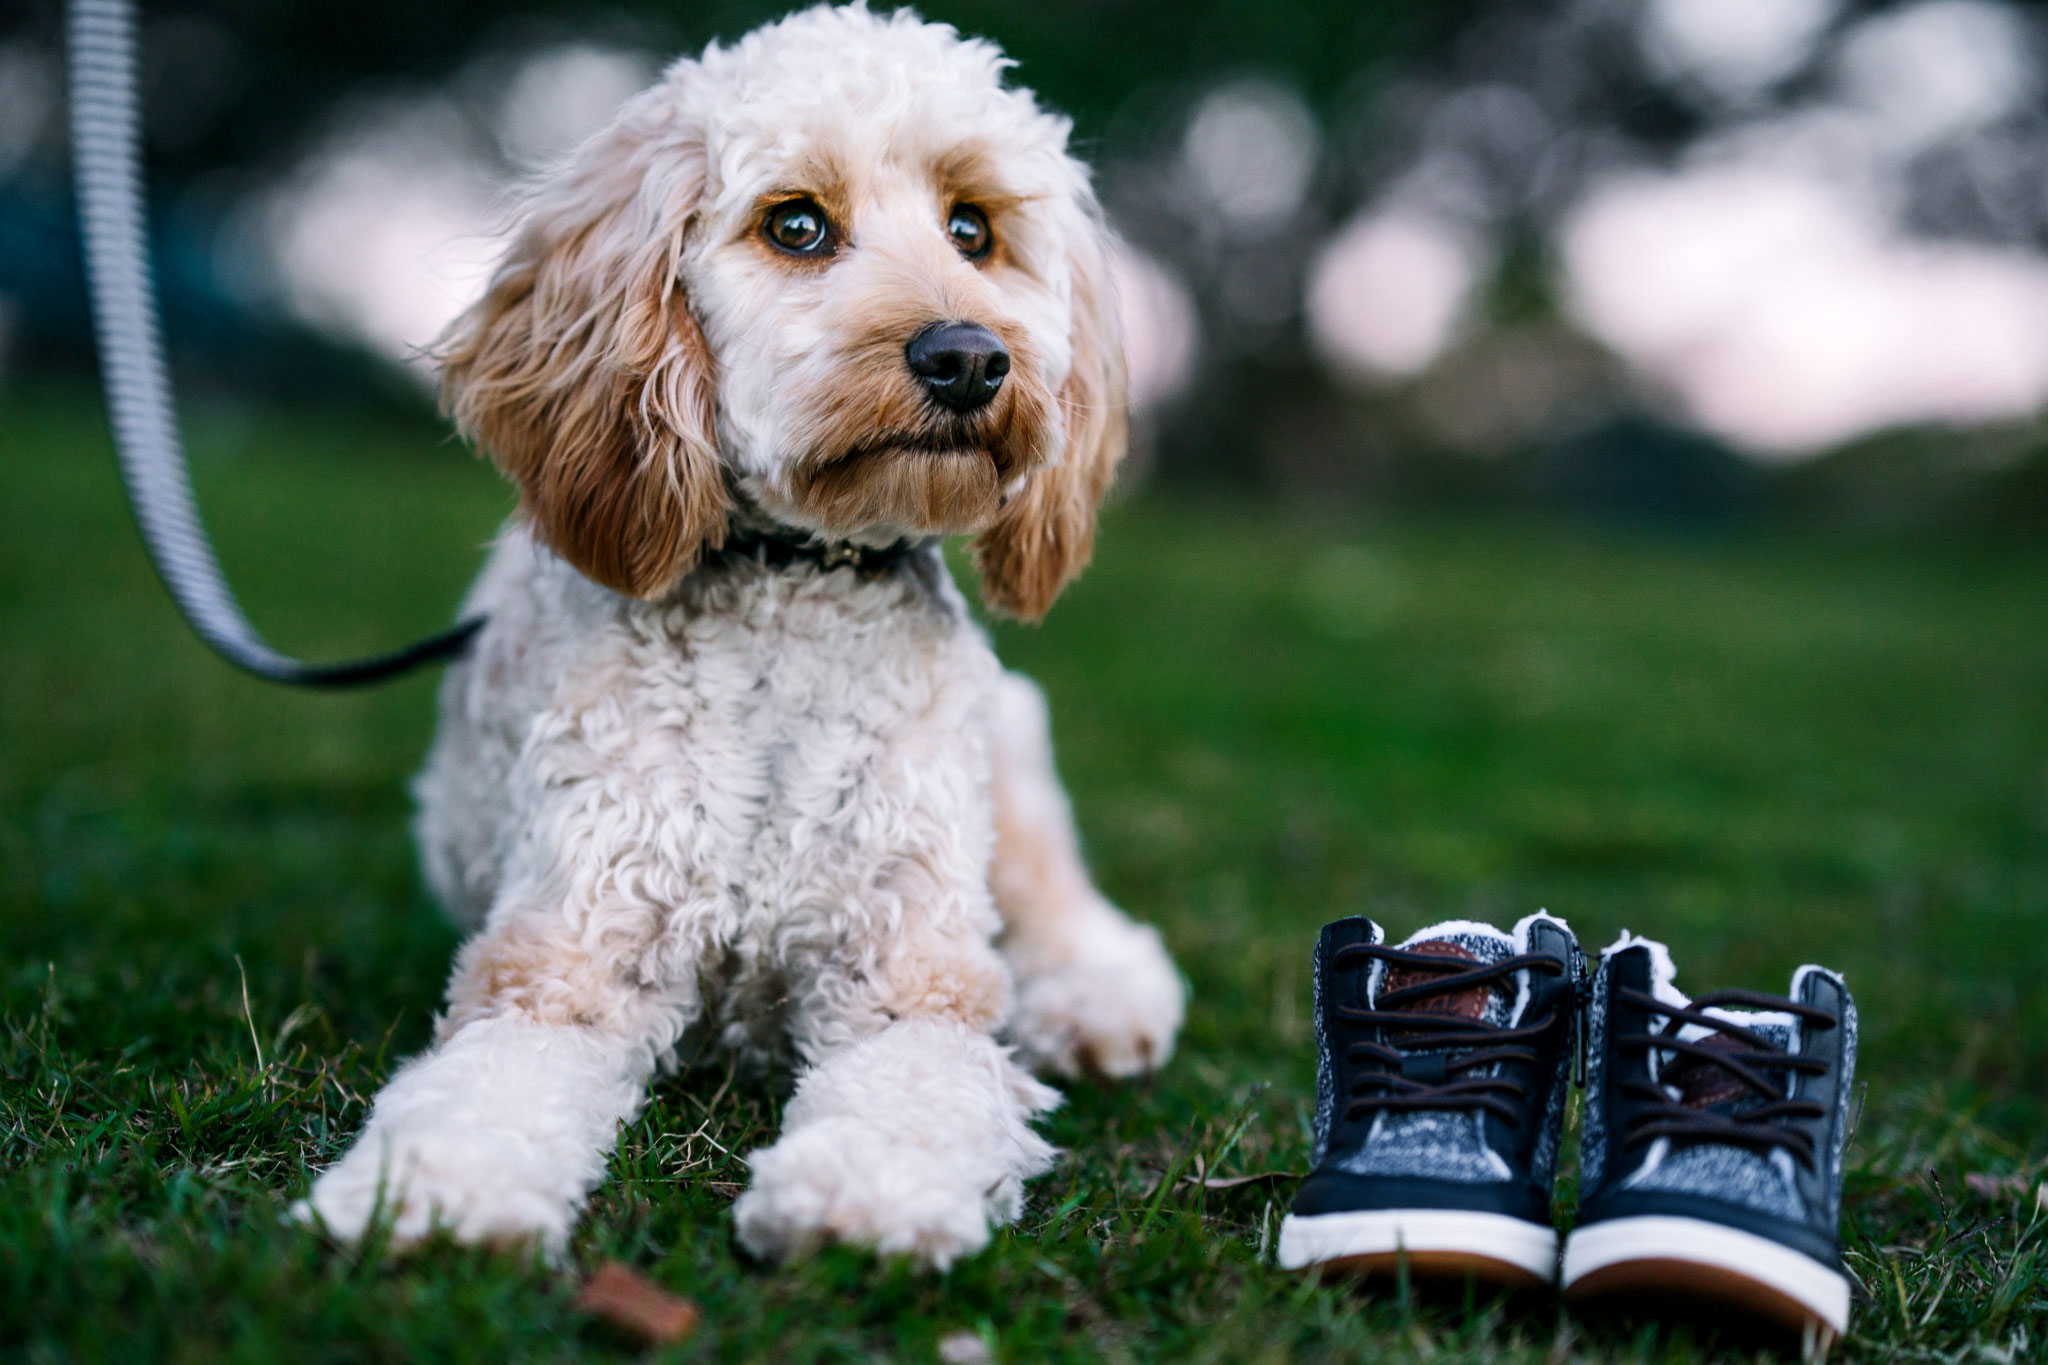 Cute poodle puppy posing beside a pair of baby shoes